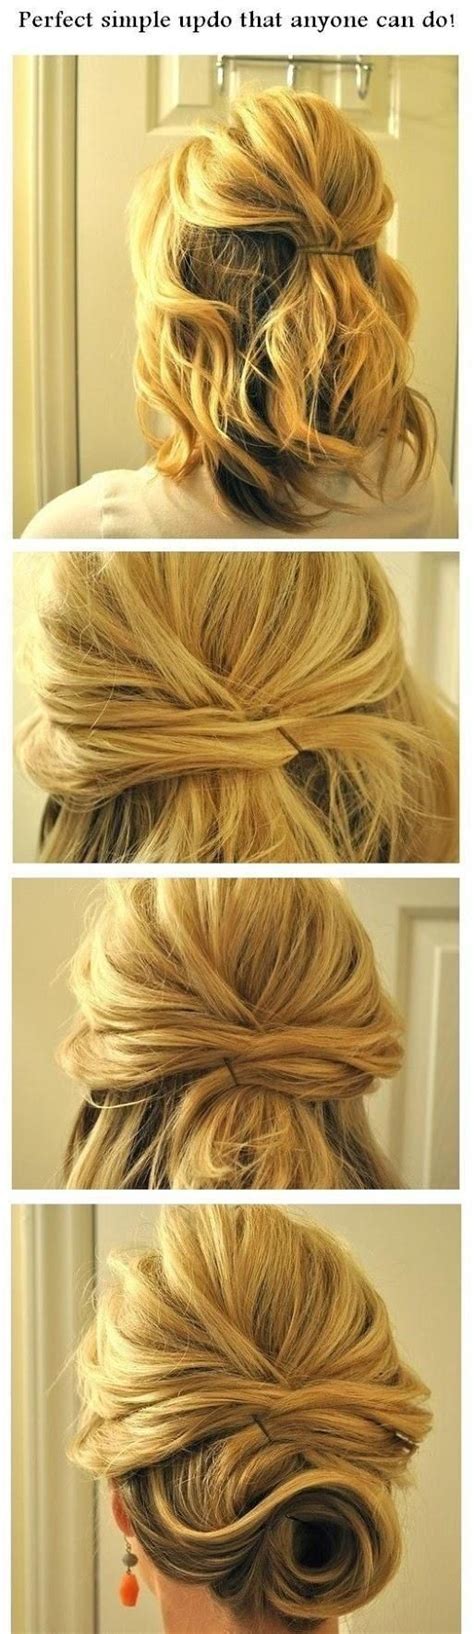 Here are some updos for your short hair that will this is a comparatively shorter beehive updo made on light natural blonde hair. 12 Short Updo Hairstyles Ideas: Anyone Can Do - PoPular ...